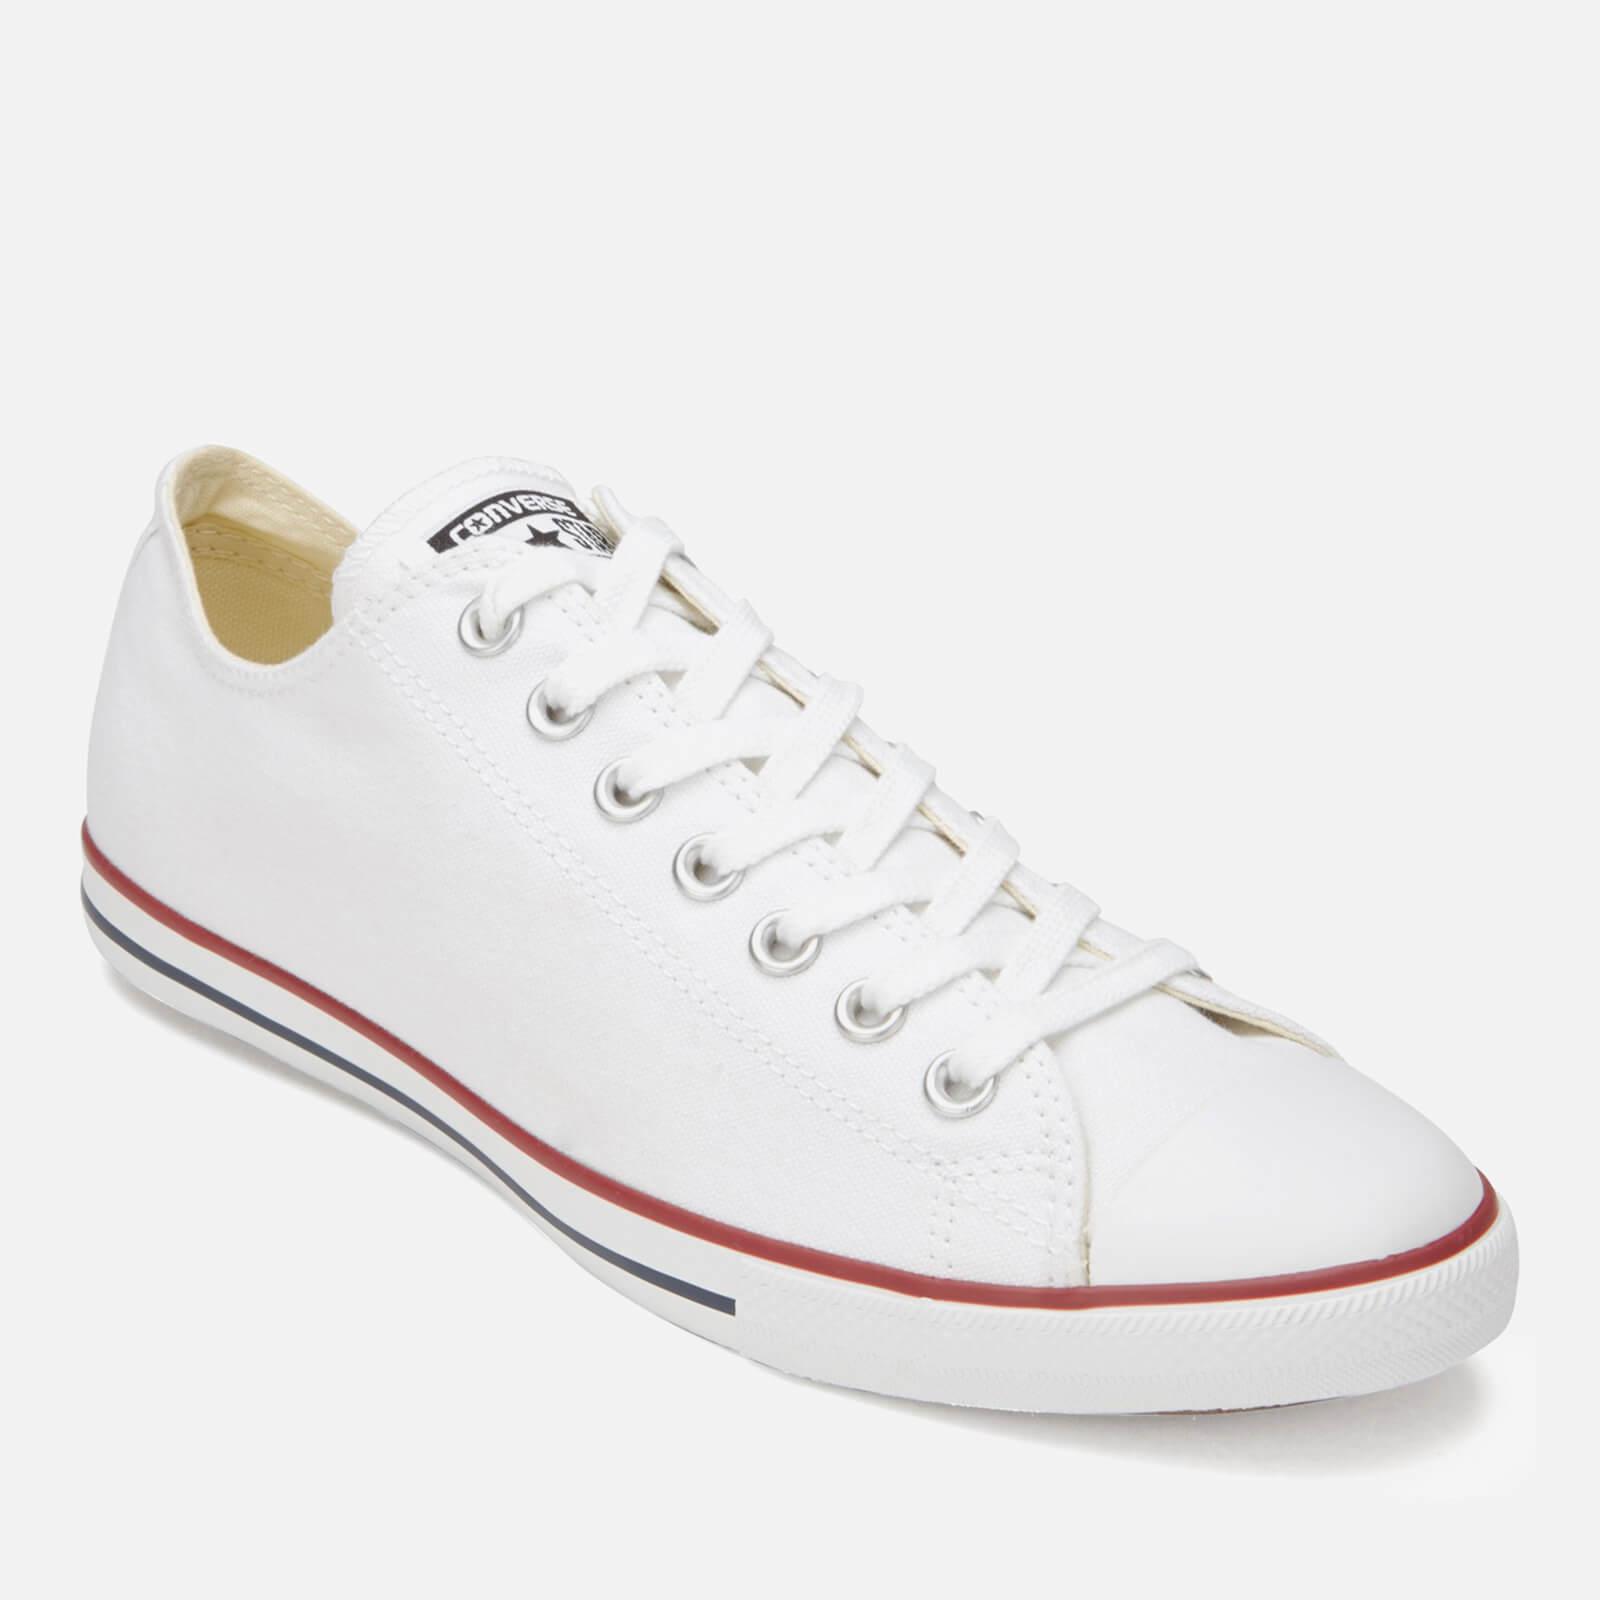 All Star Lean Converse Outlets Online, 63% OFF | poetsgrove.com